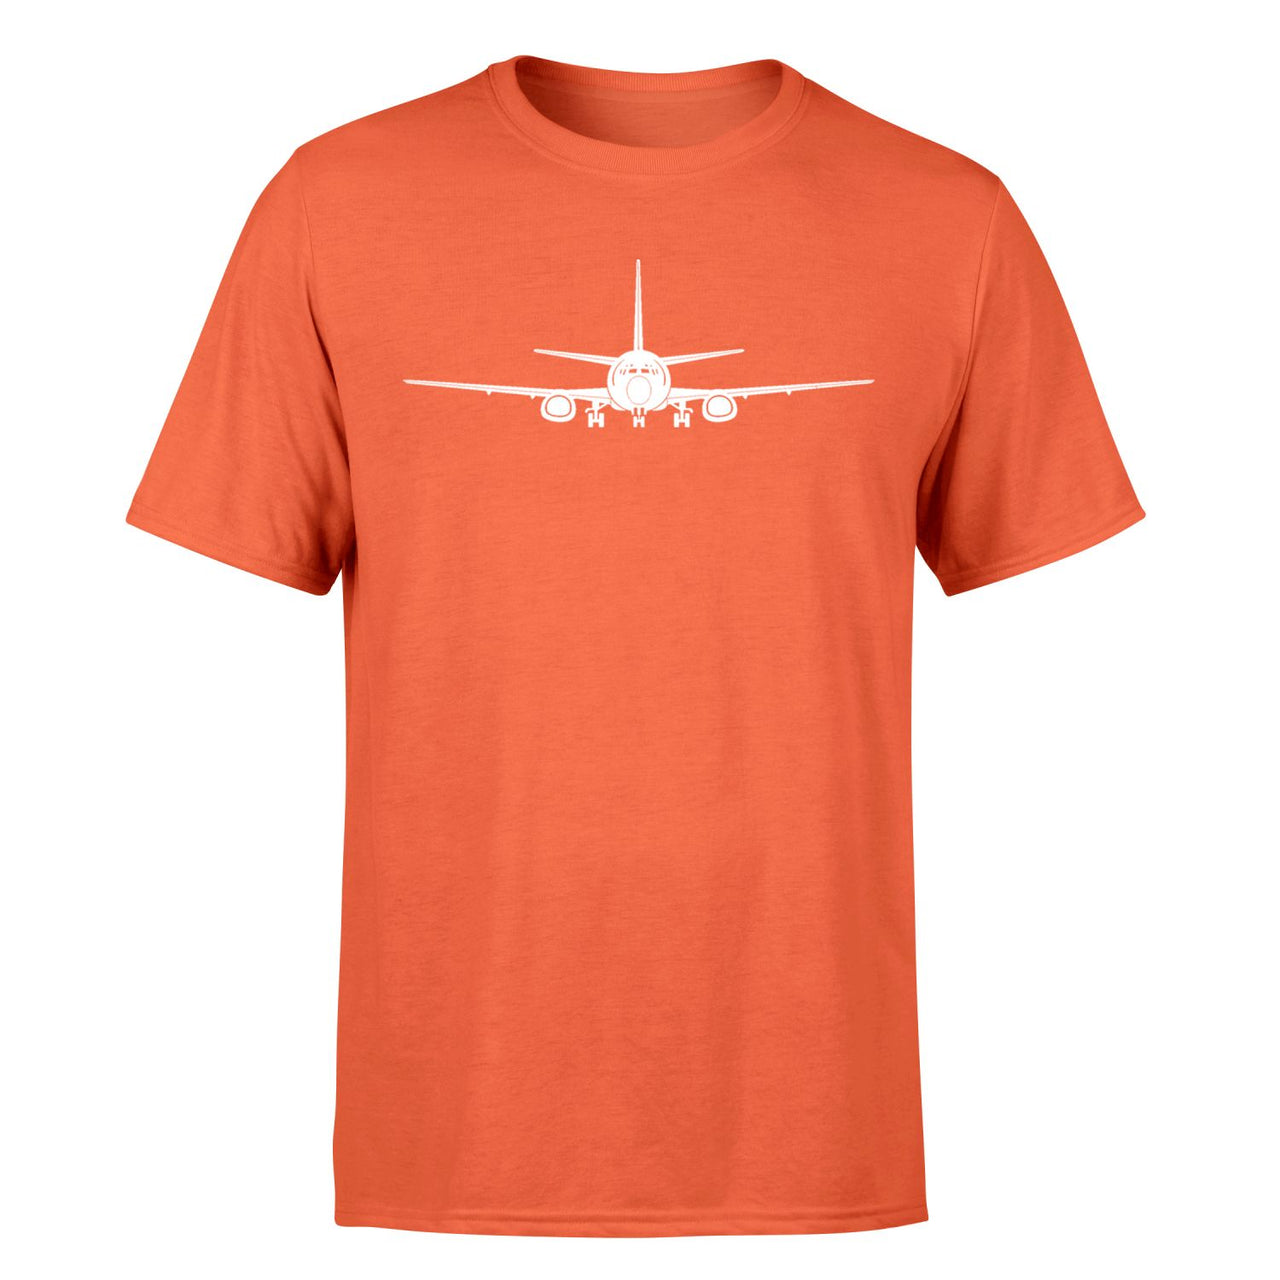 Boeing 737 Silhouette Designed T-Shirts